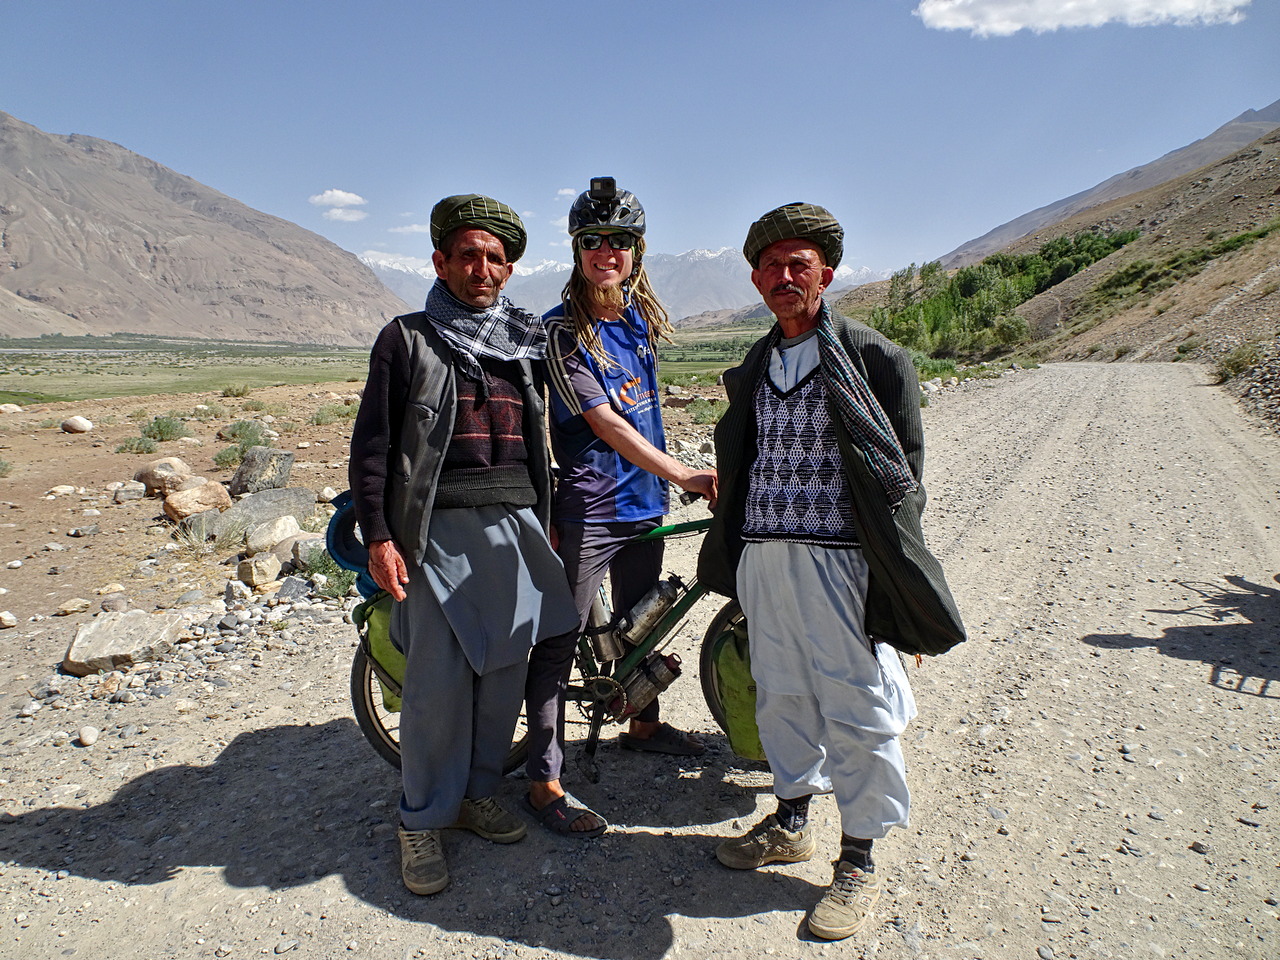 Meeting lovely locals in Afghanistan